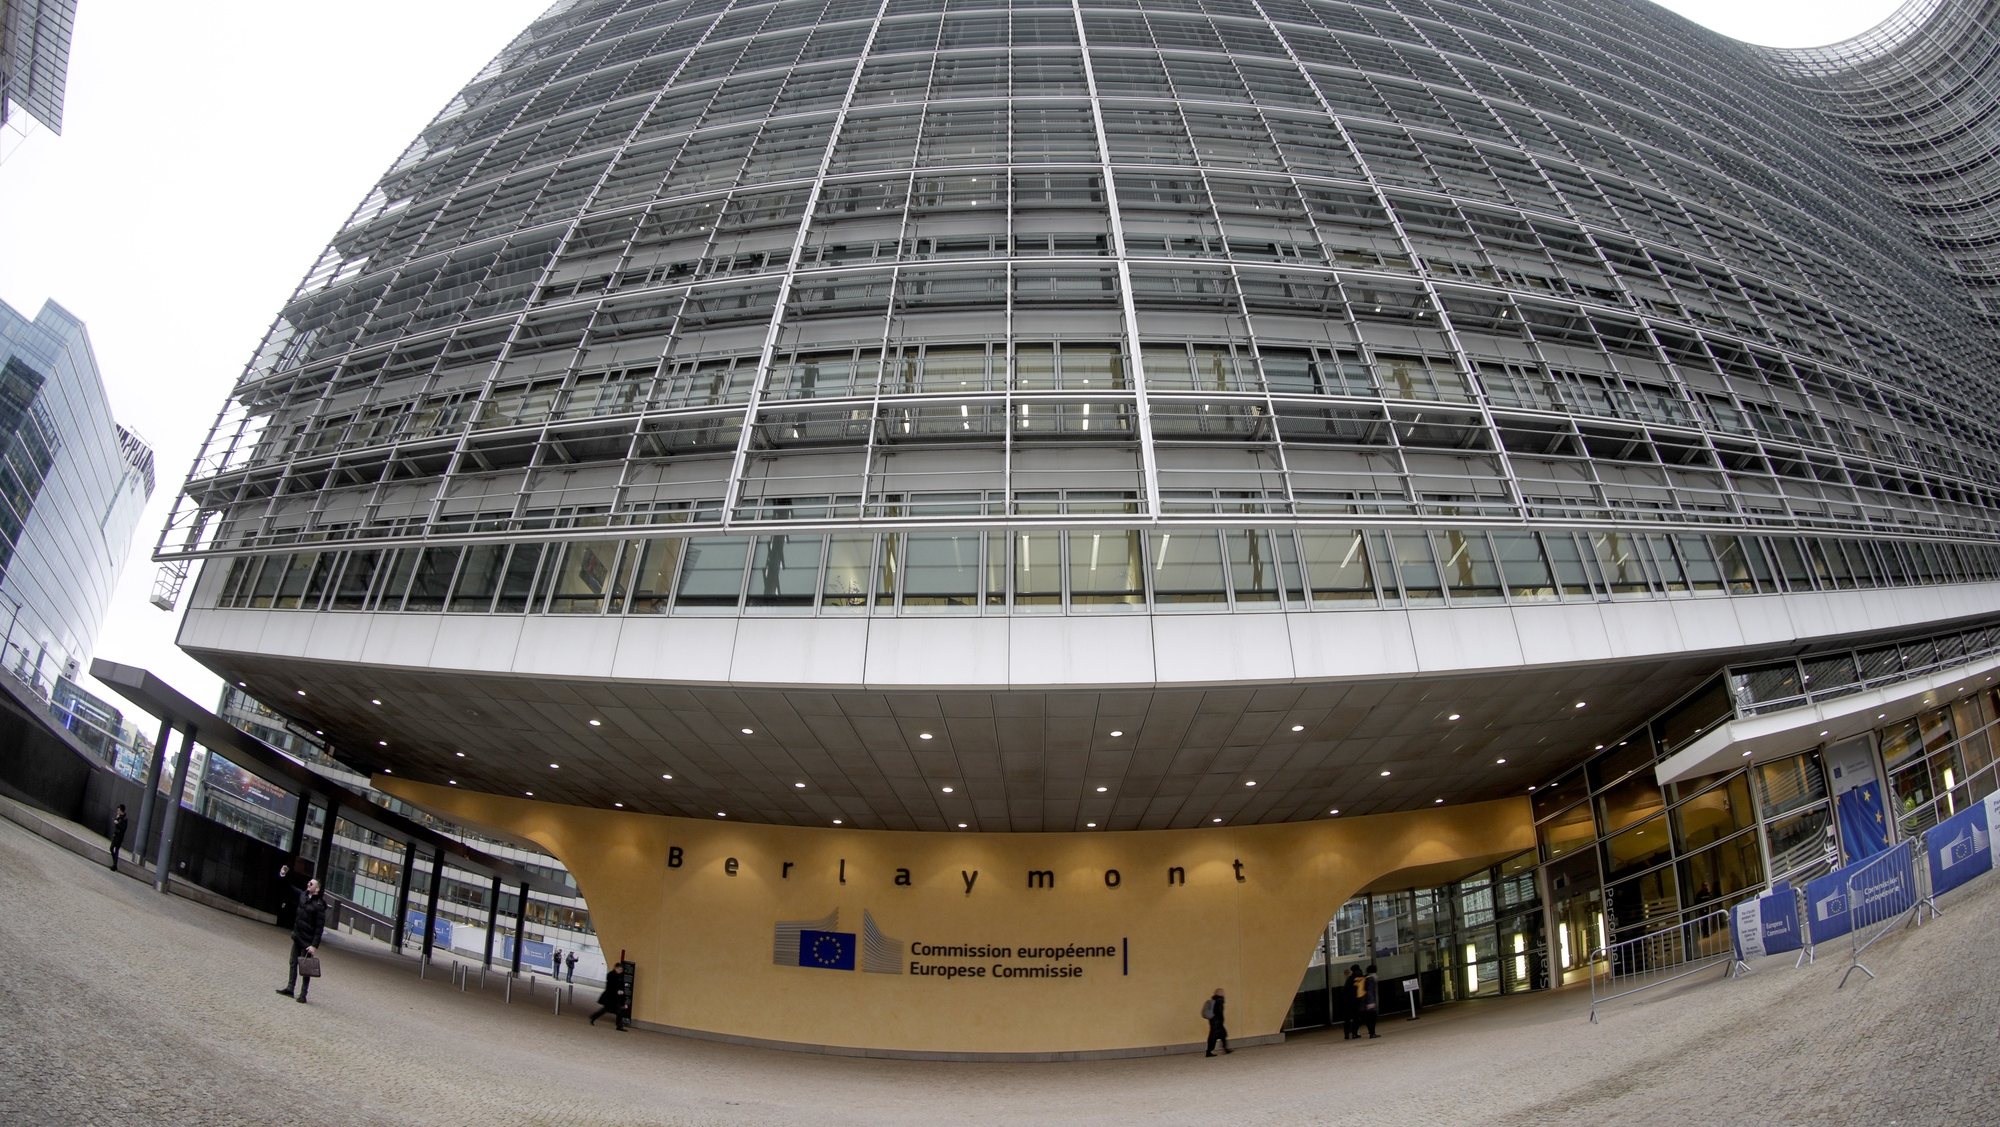 epa08026182 A photo taken with a fisheye lens shows the European Commission headquarters in Brussels, Belgium, 26 November 2019. President-Elect of the European Commission Ursula von der Leyen on 27 November 2019 will present her team of Commissioners-designate and the new Commission&#039;s programme to the European Parliament in Strasbourg, France. Members of the European Parliament (MEPs) will then discuss and decide (by simple majority) whether to elect the College of Commissioners or not.  EPA/OLIVIER HOSLET